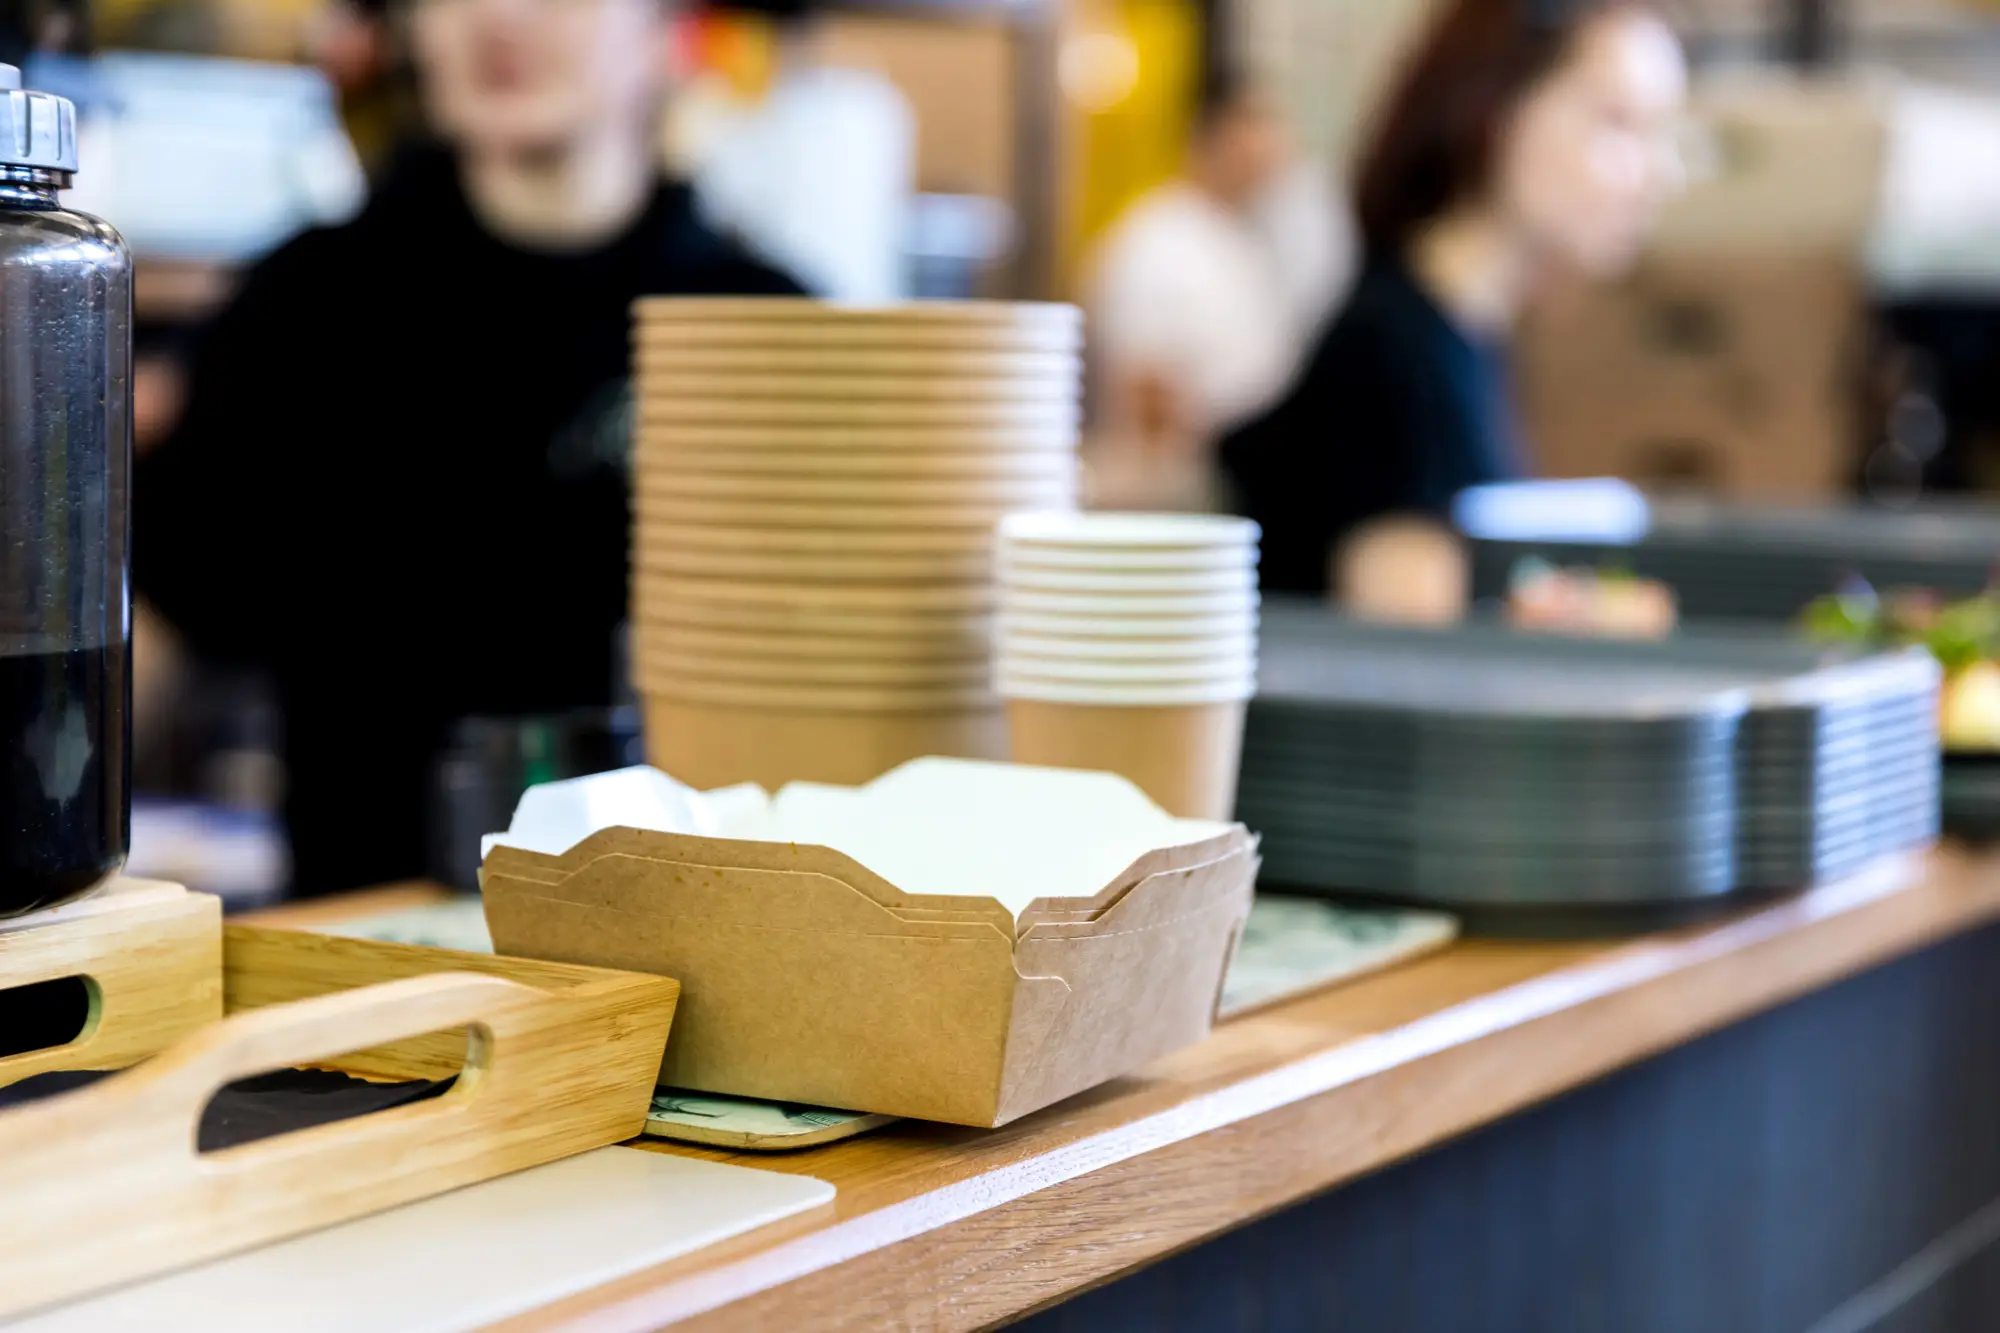 Compostable or recyclable packaging is an easy sustainable practice to implement